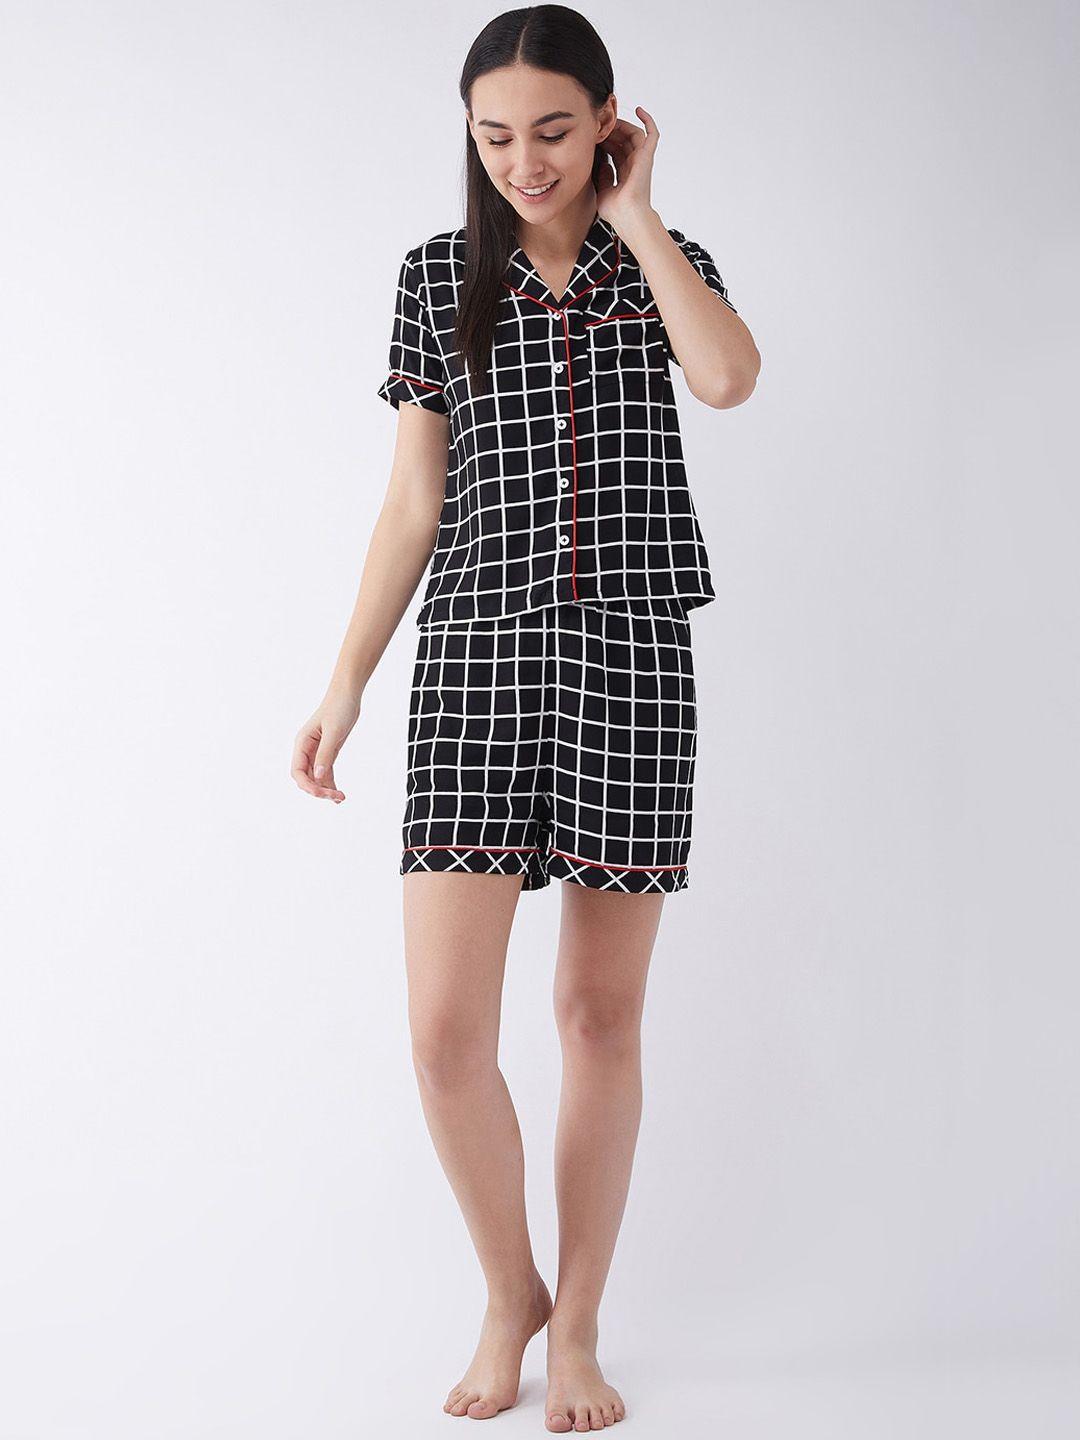 baesd checked shirt with short